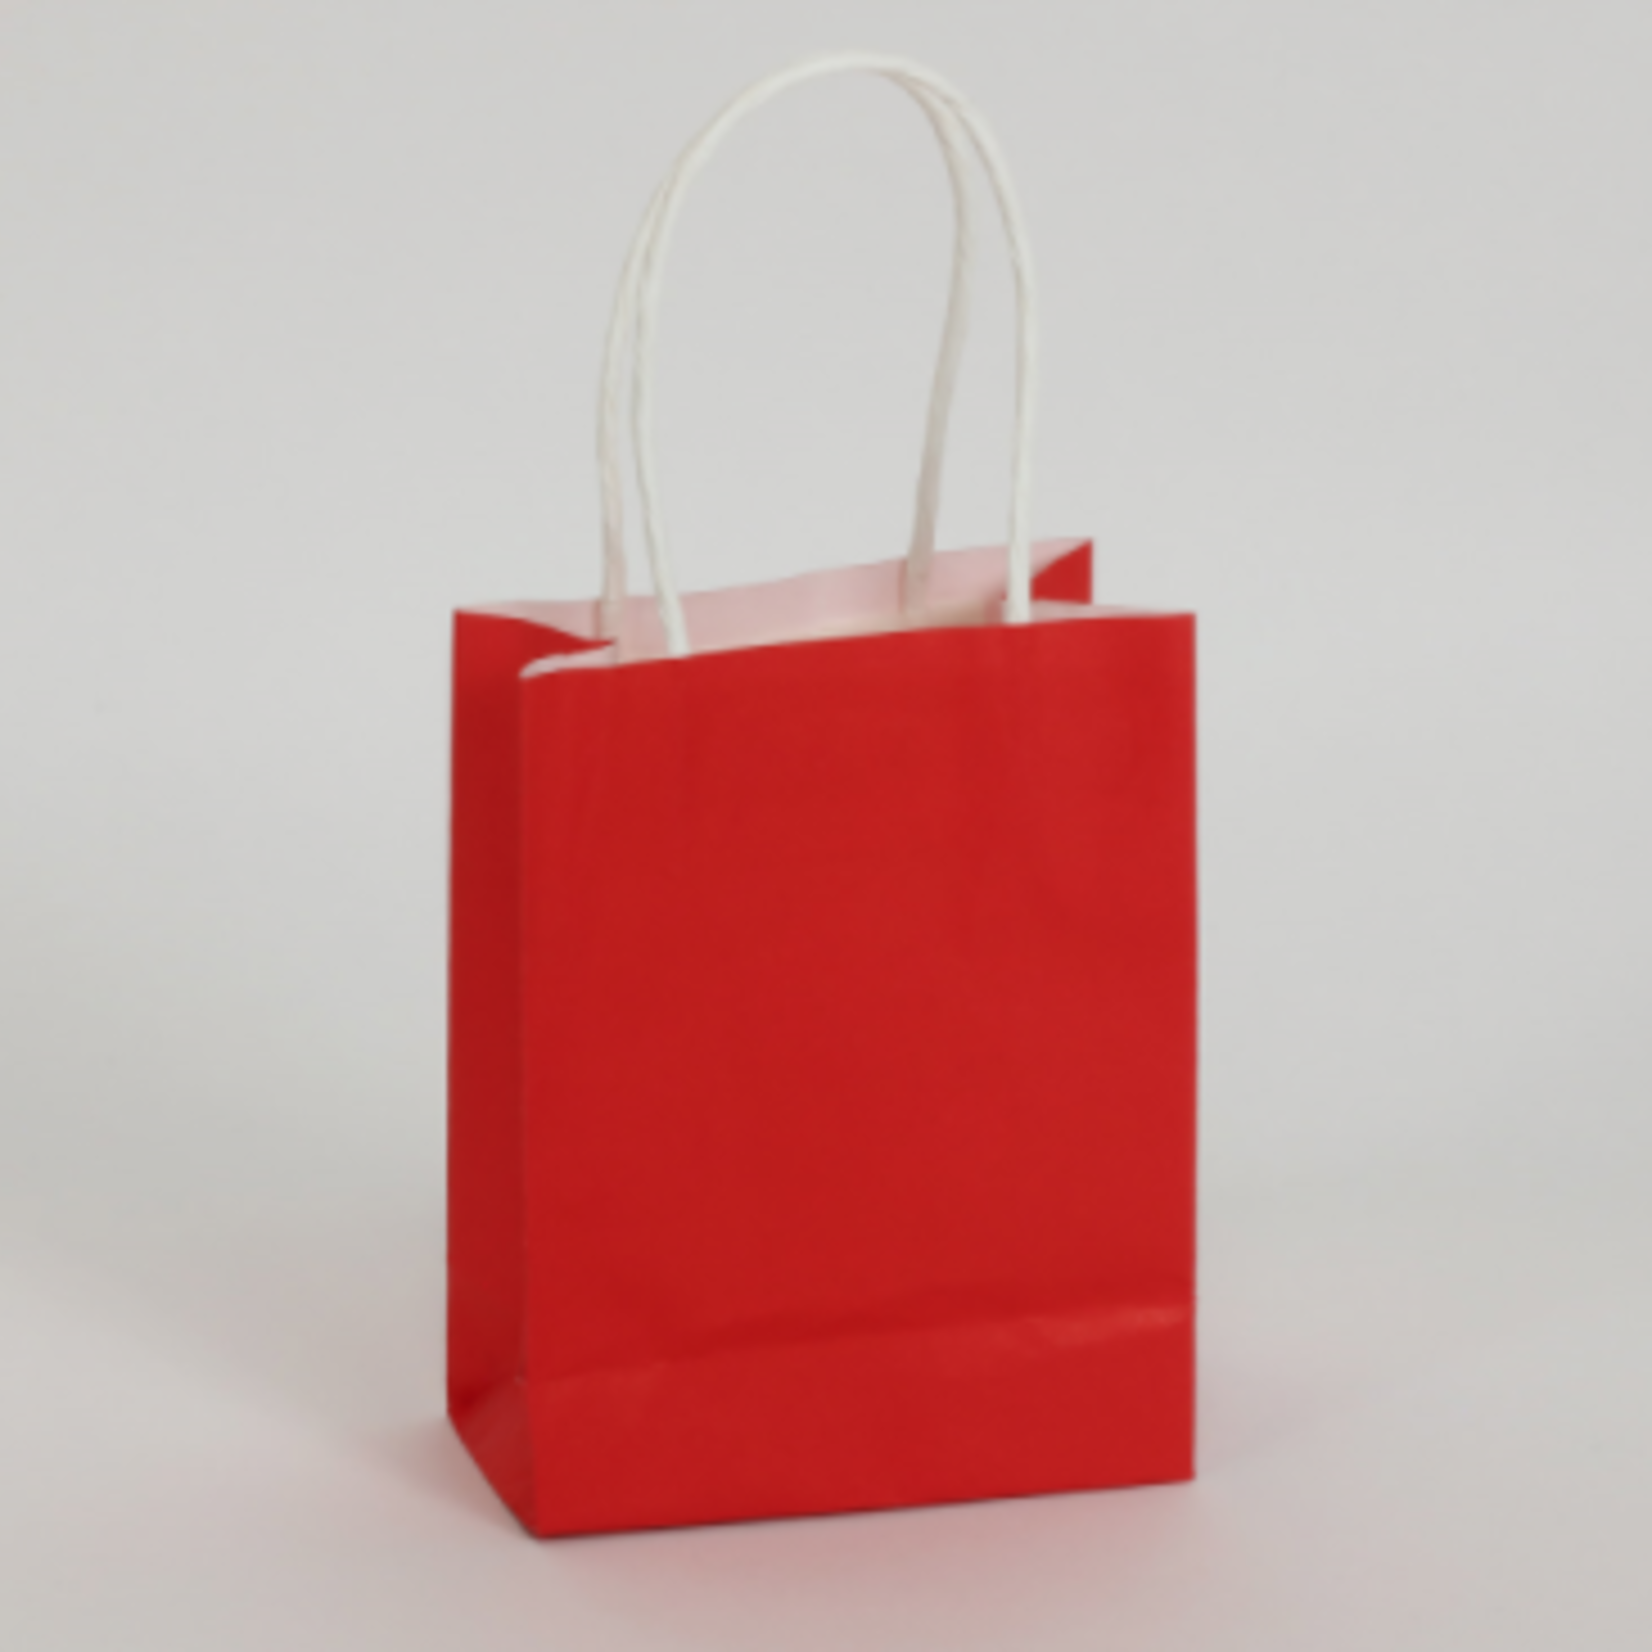 RED TOTE BAGS 6’’ X 8’’, 10 PCS